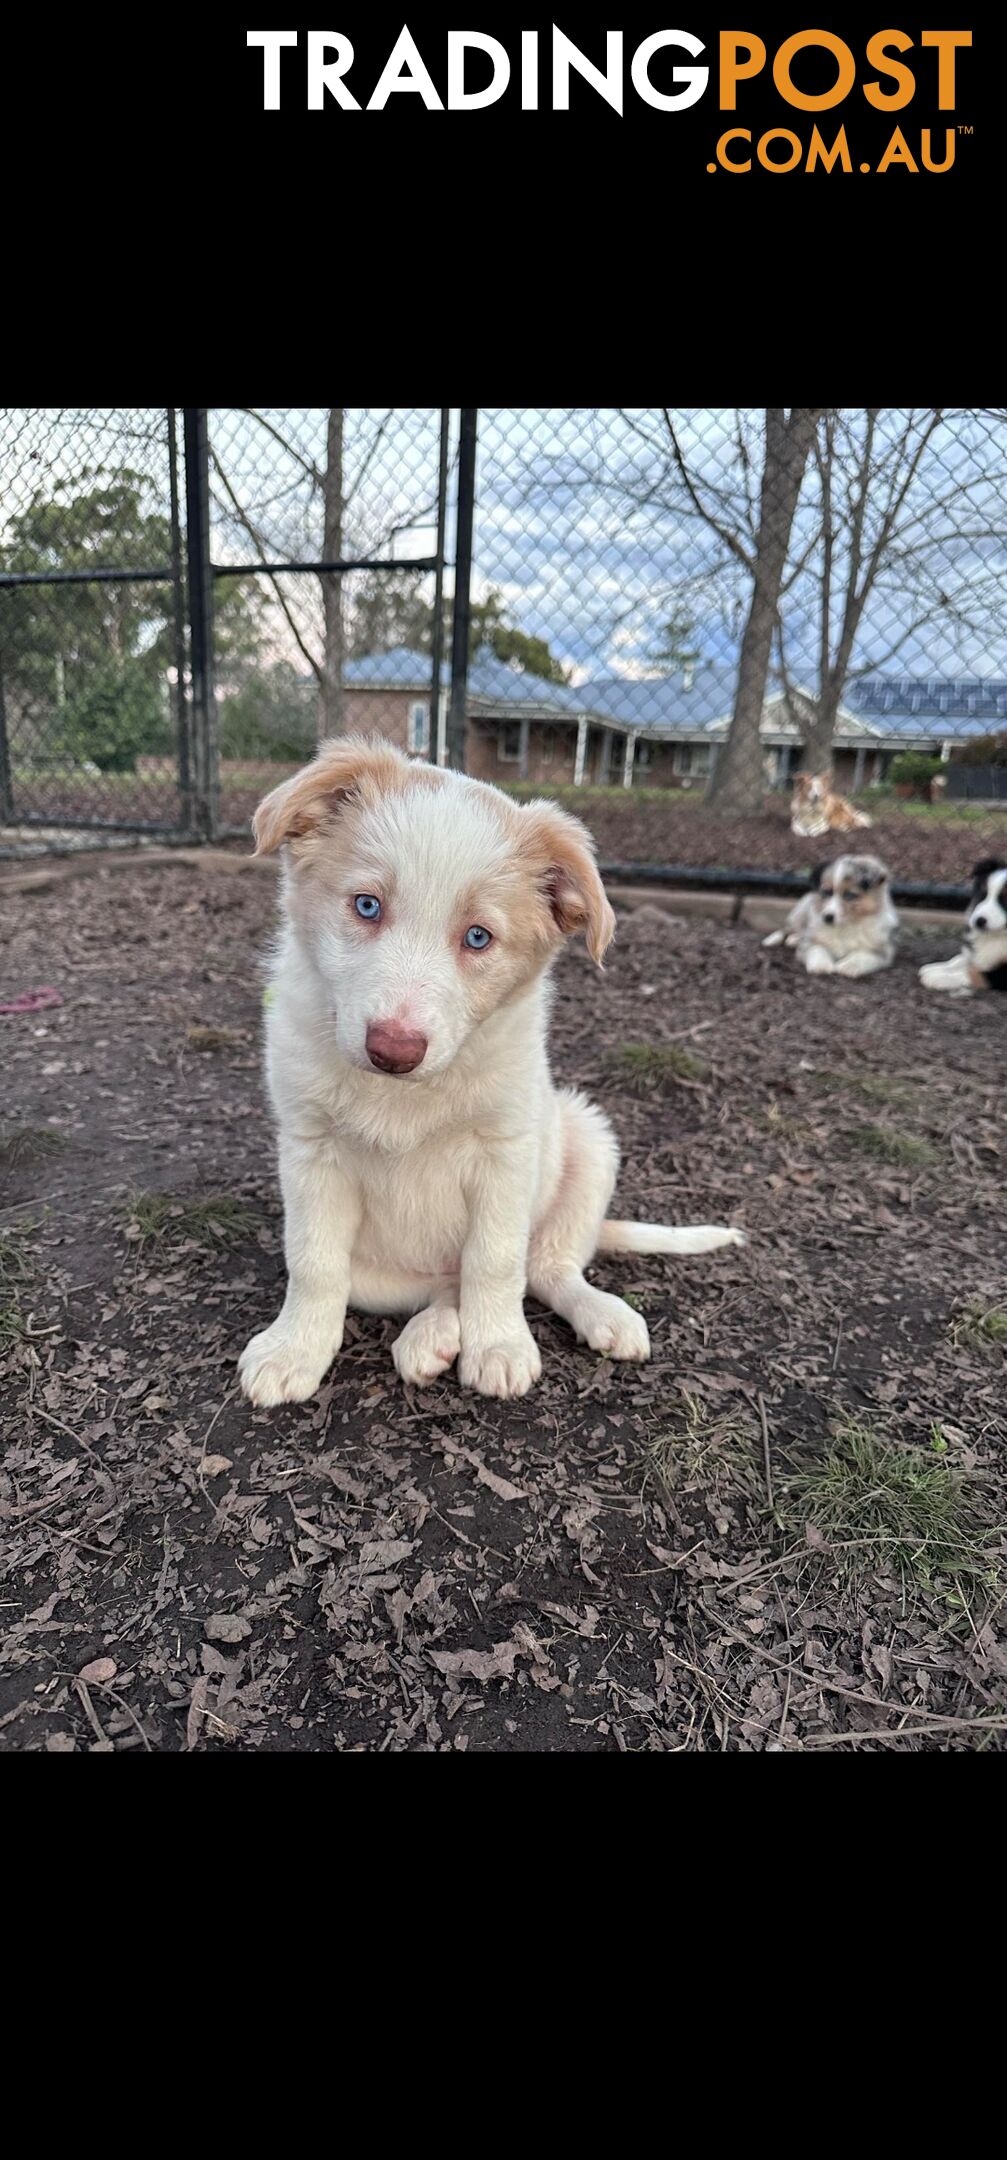 Border Collie Pups For Sale